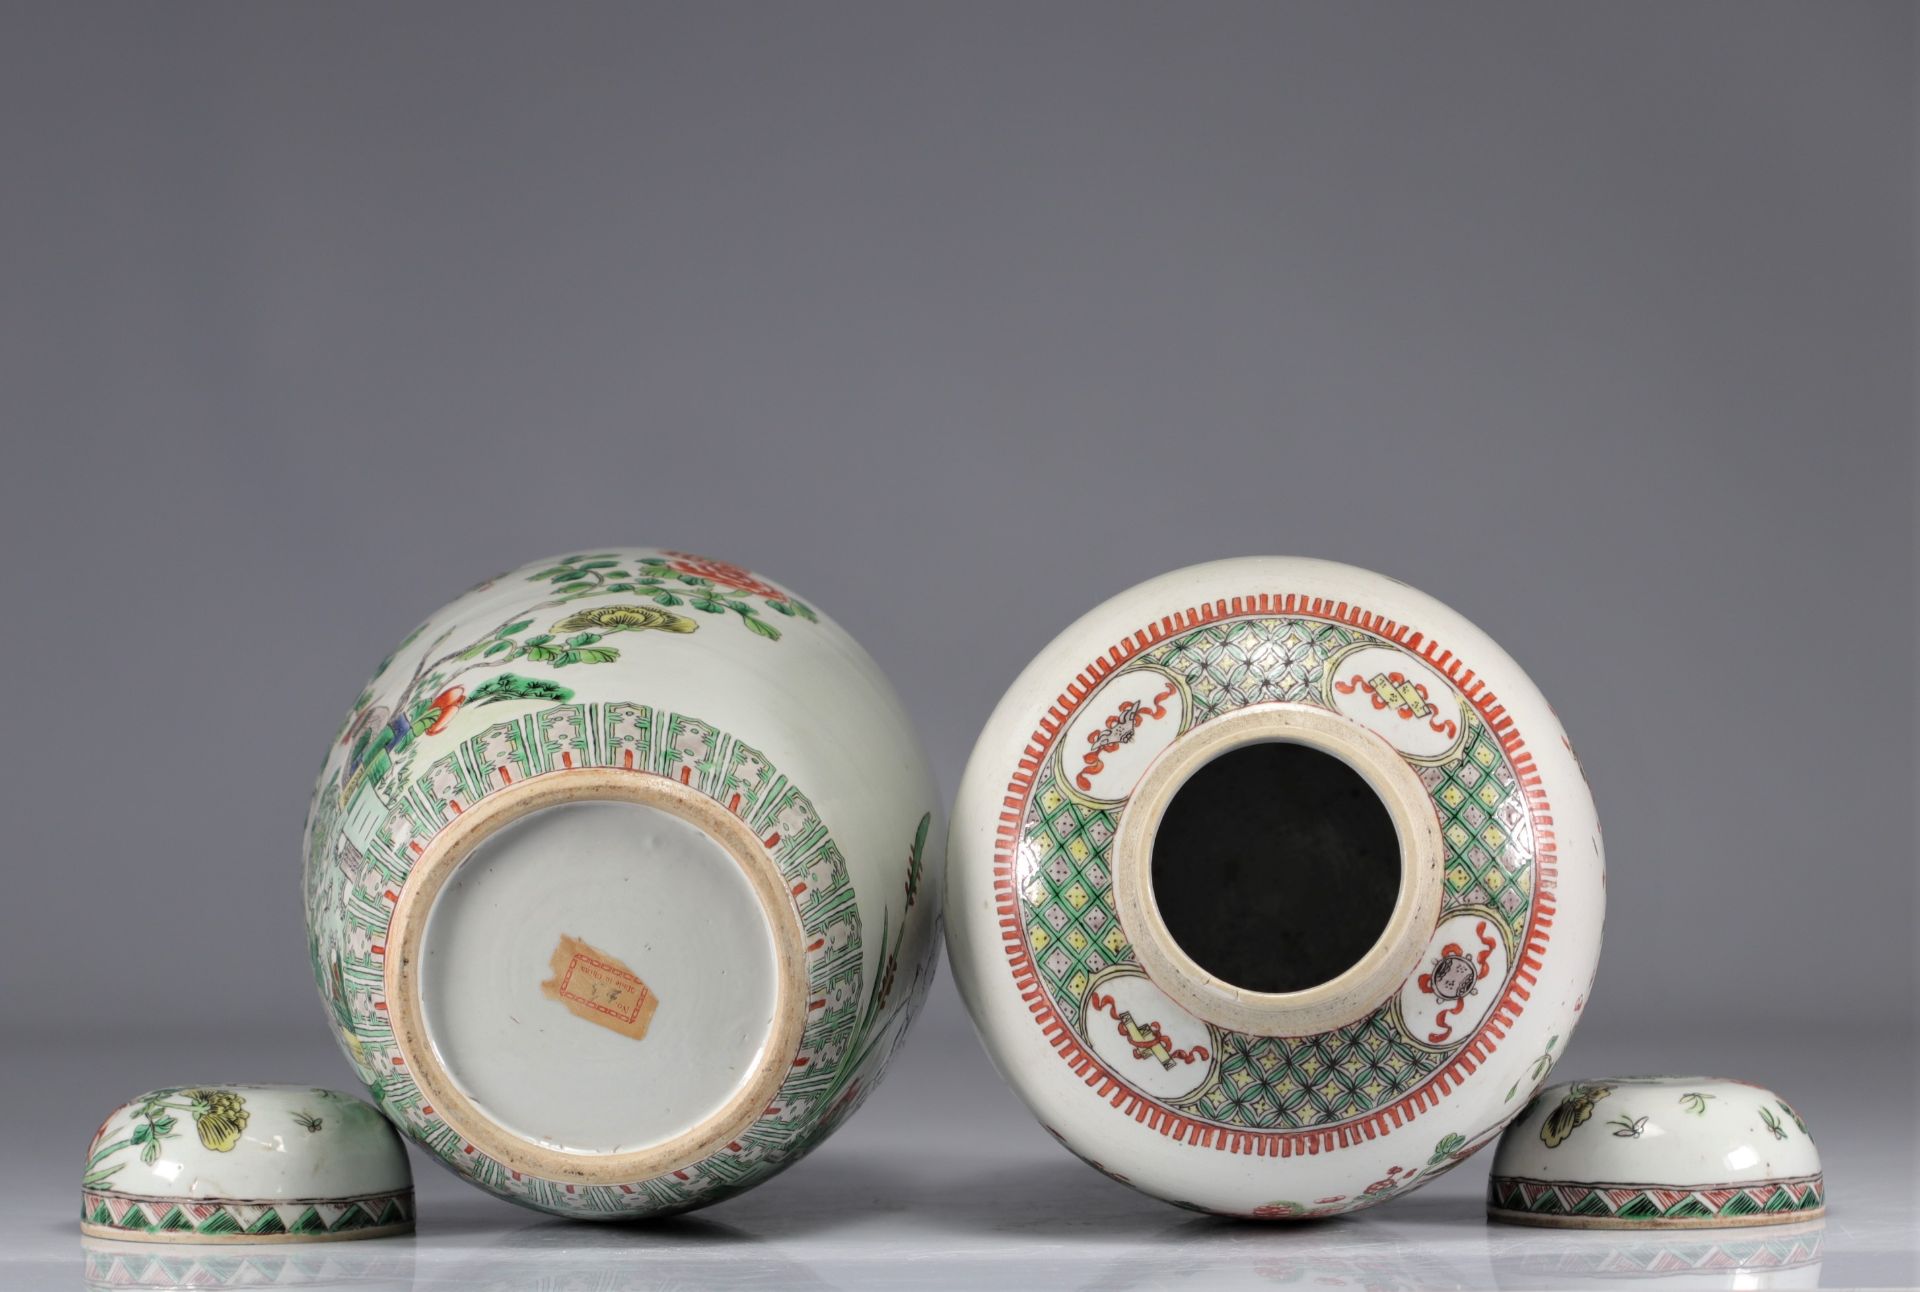 (2) Pair of vases covered with Famille verte and decorated with birds from 19th century - Image 4 of 4